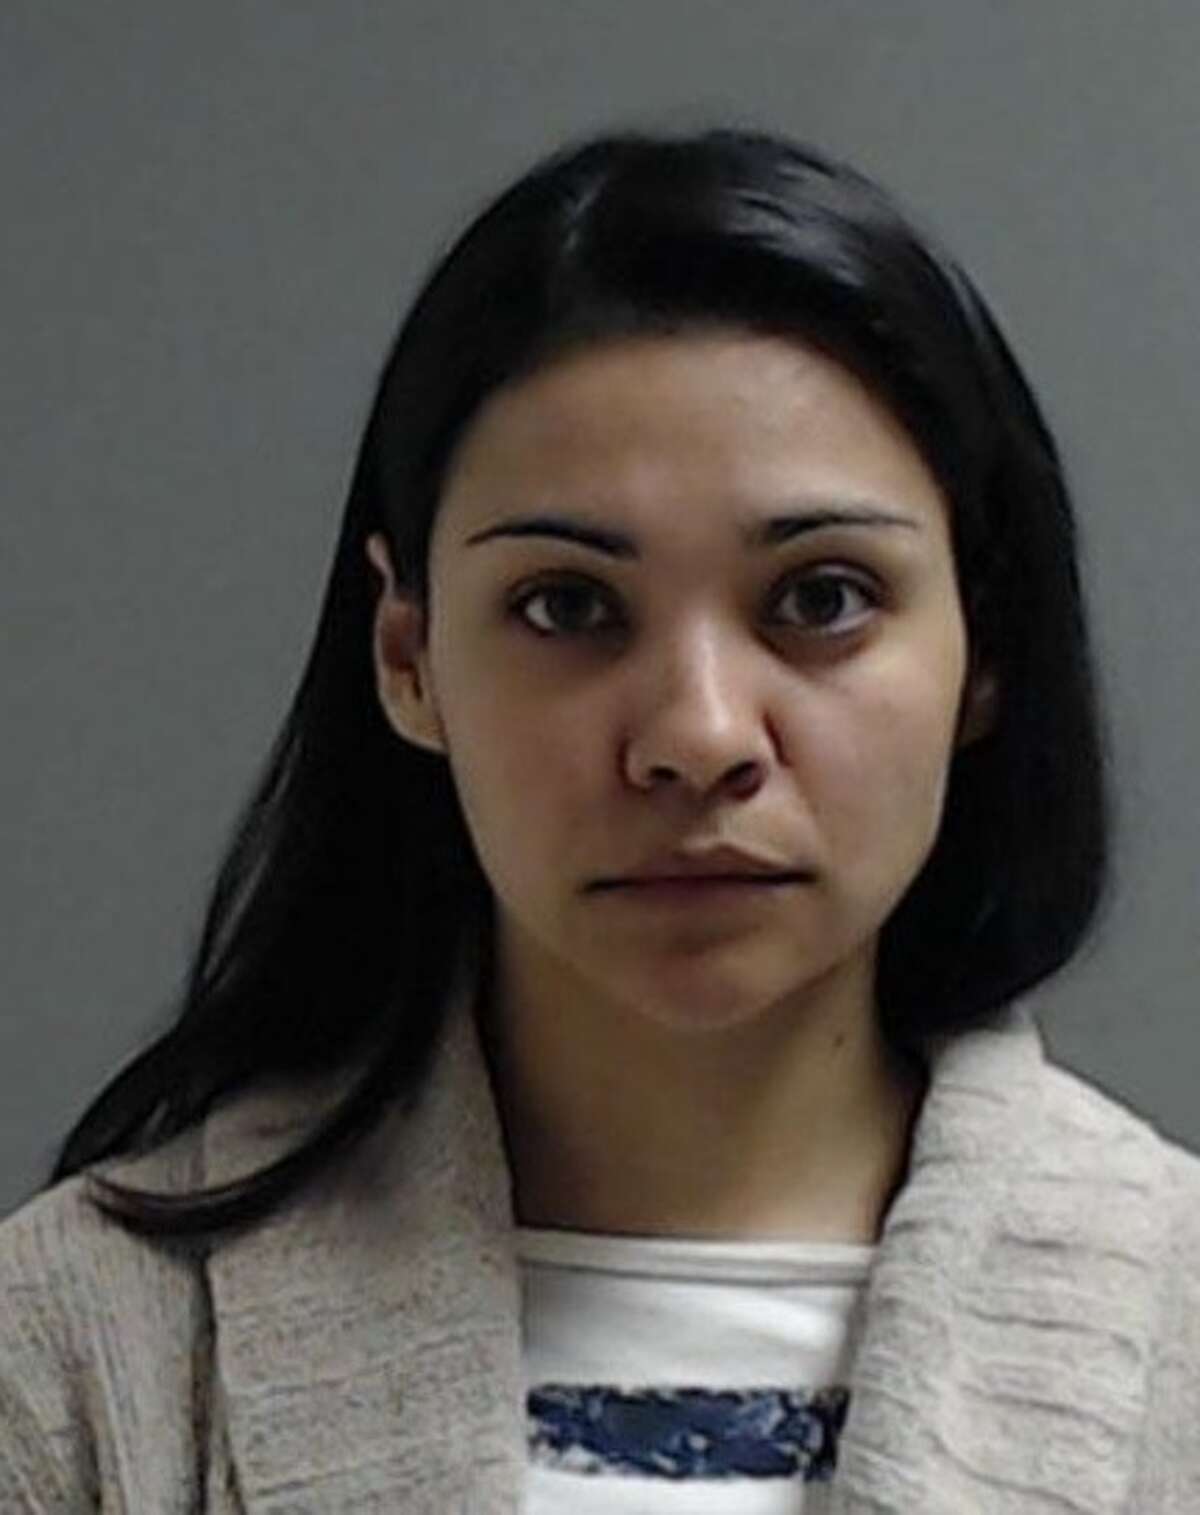 Vanessa McManness, 31, is accused of improper relationship with a student and indecency with a child.